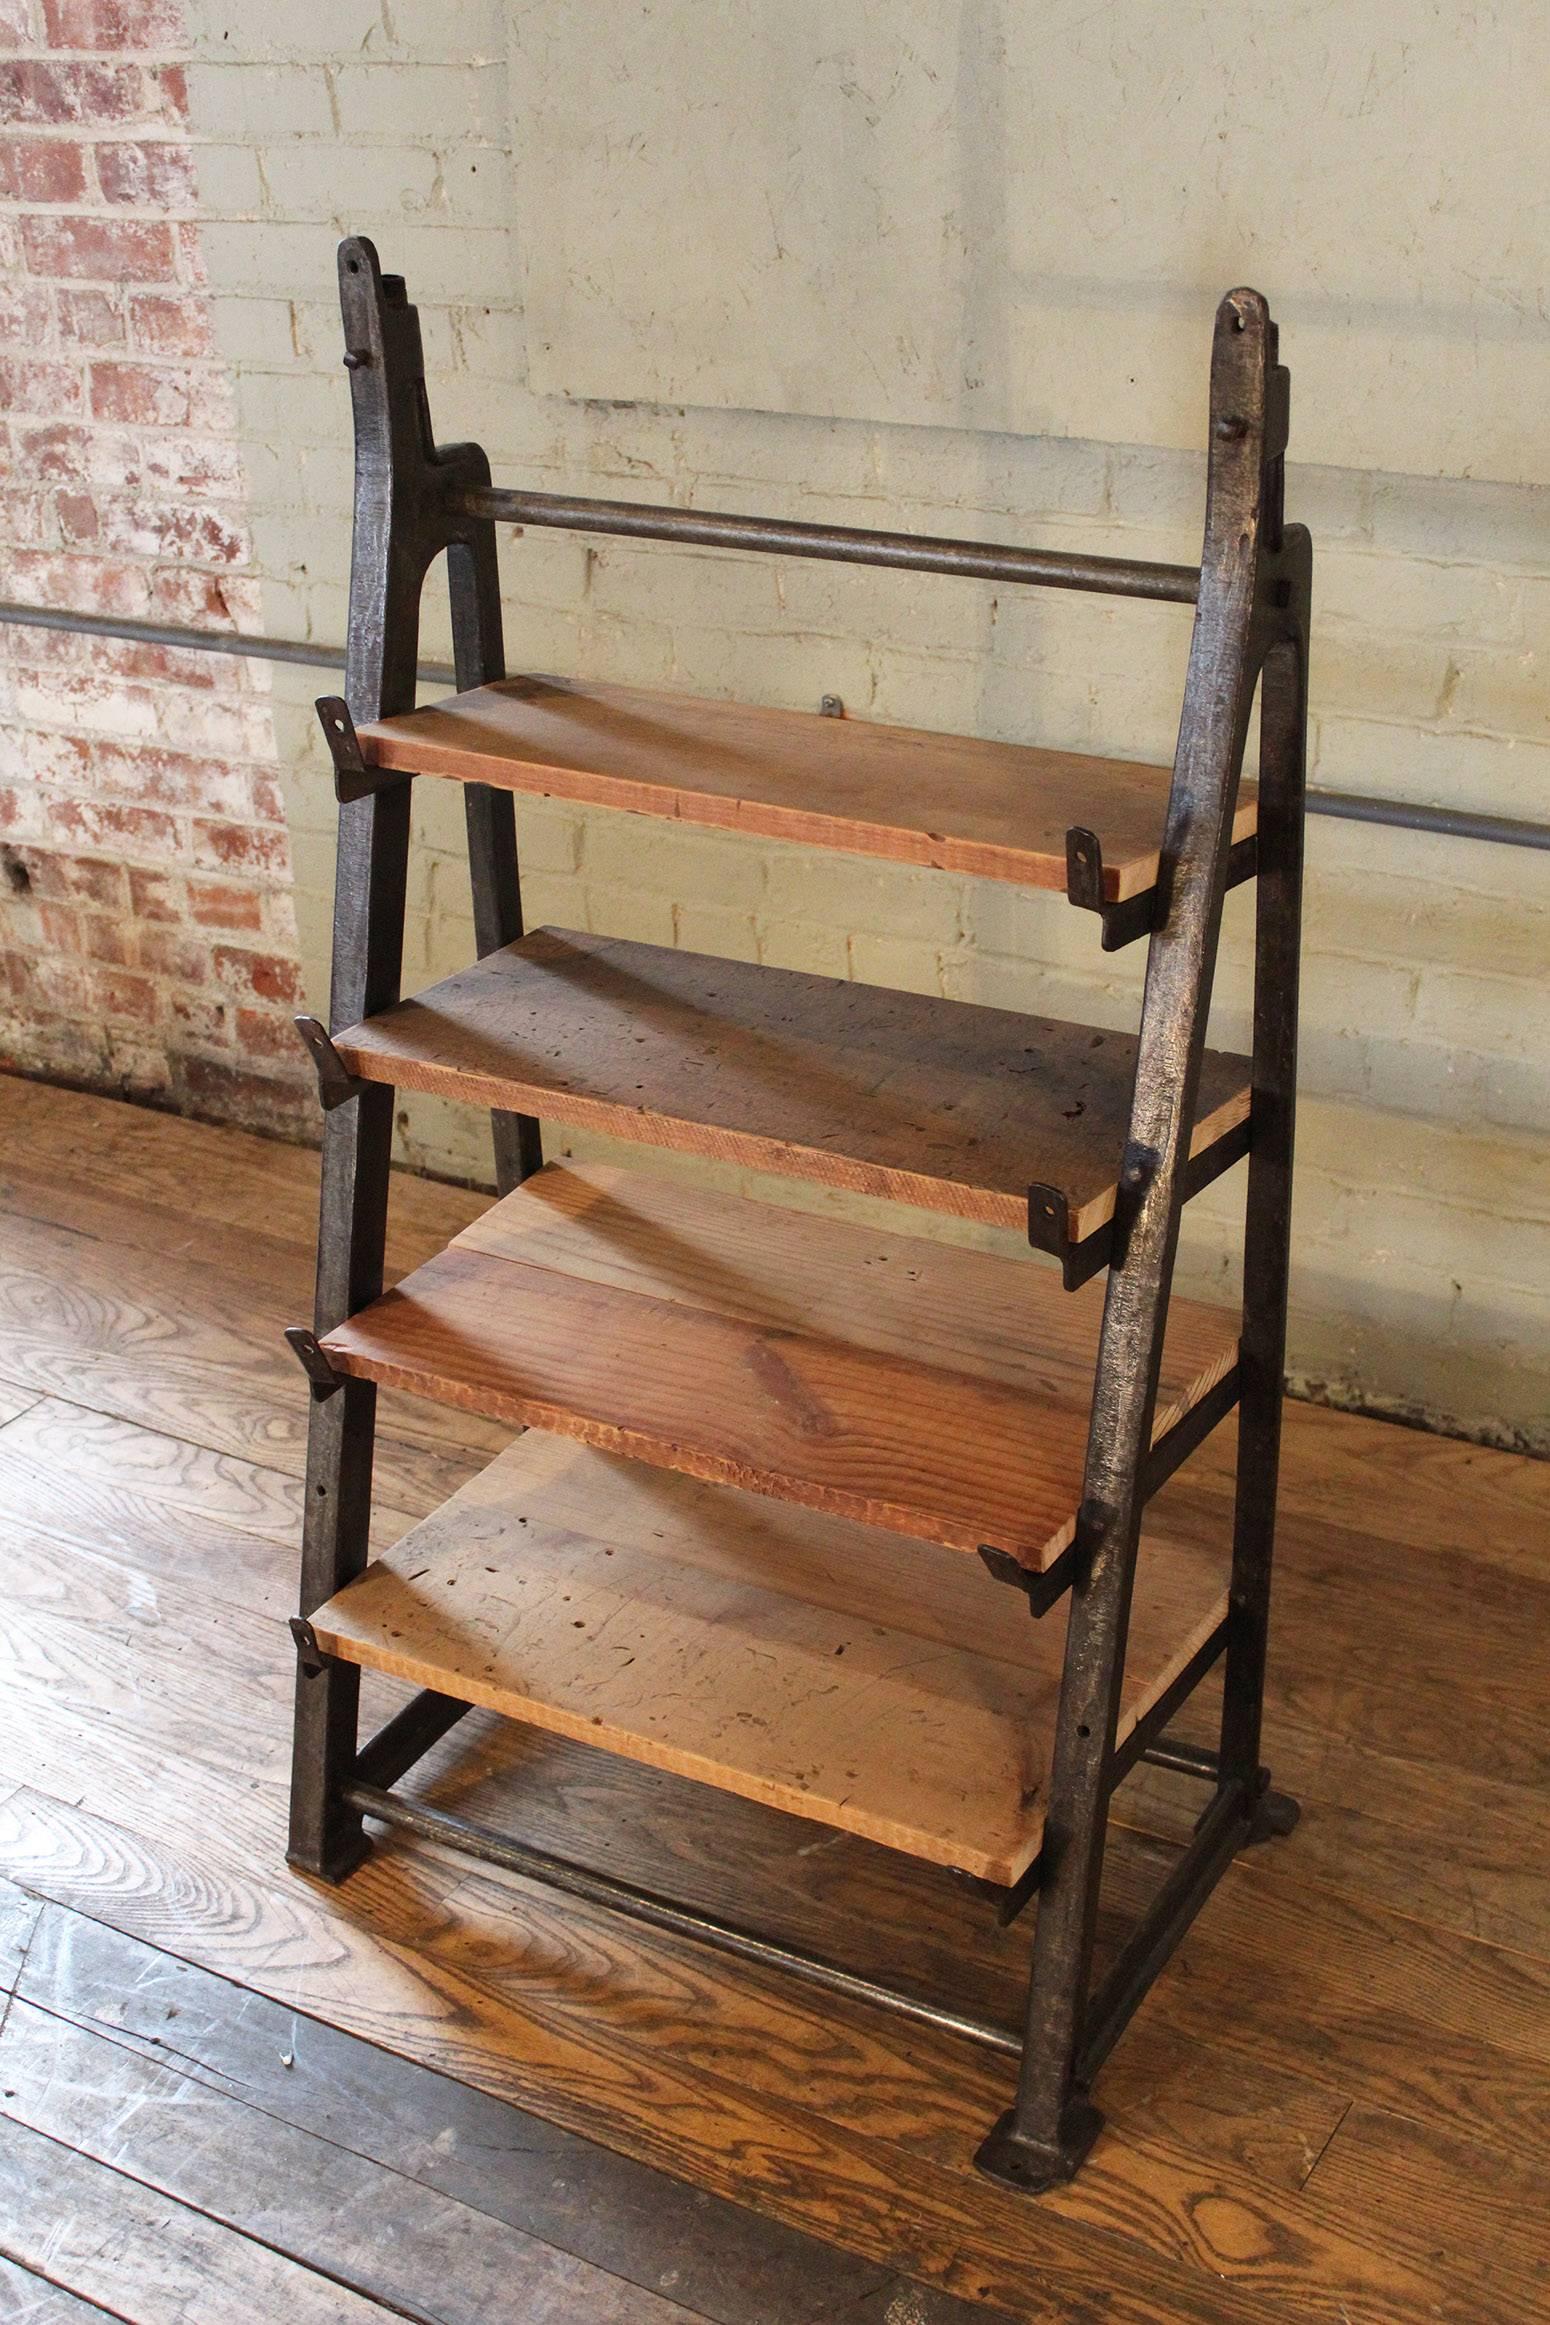 Custom Factory Vintage Industrial Cast Iron & Wood Shelving Storage Unit with Four Shelves, each one a different depth. 